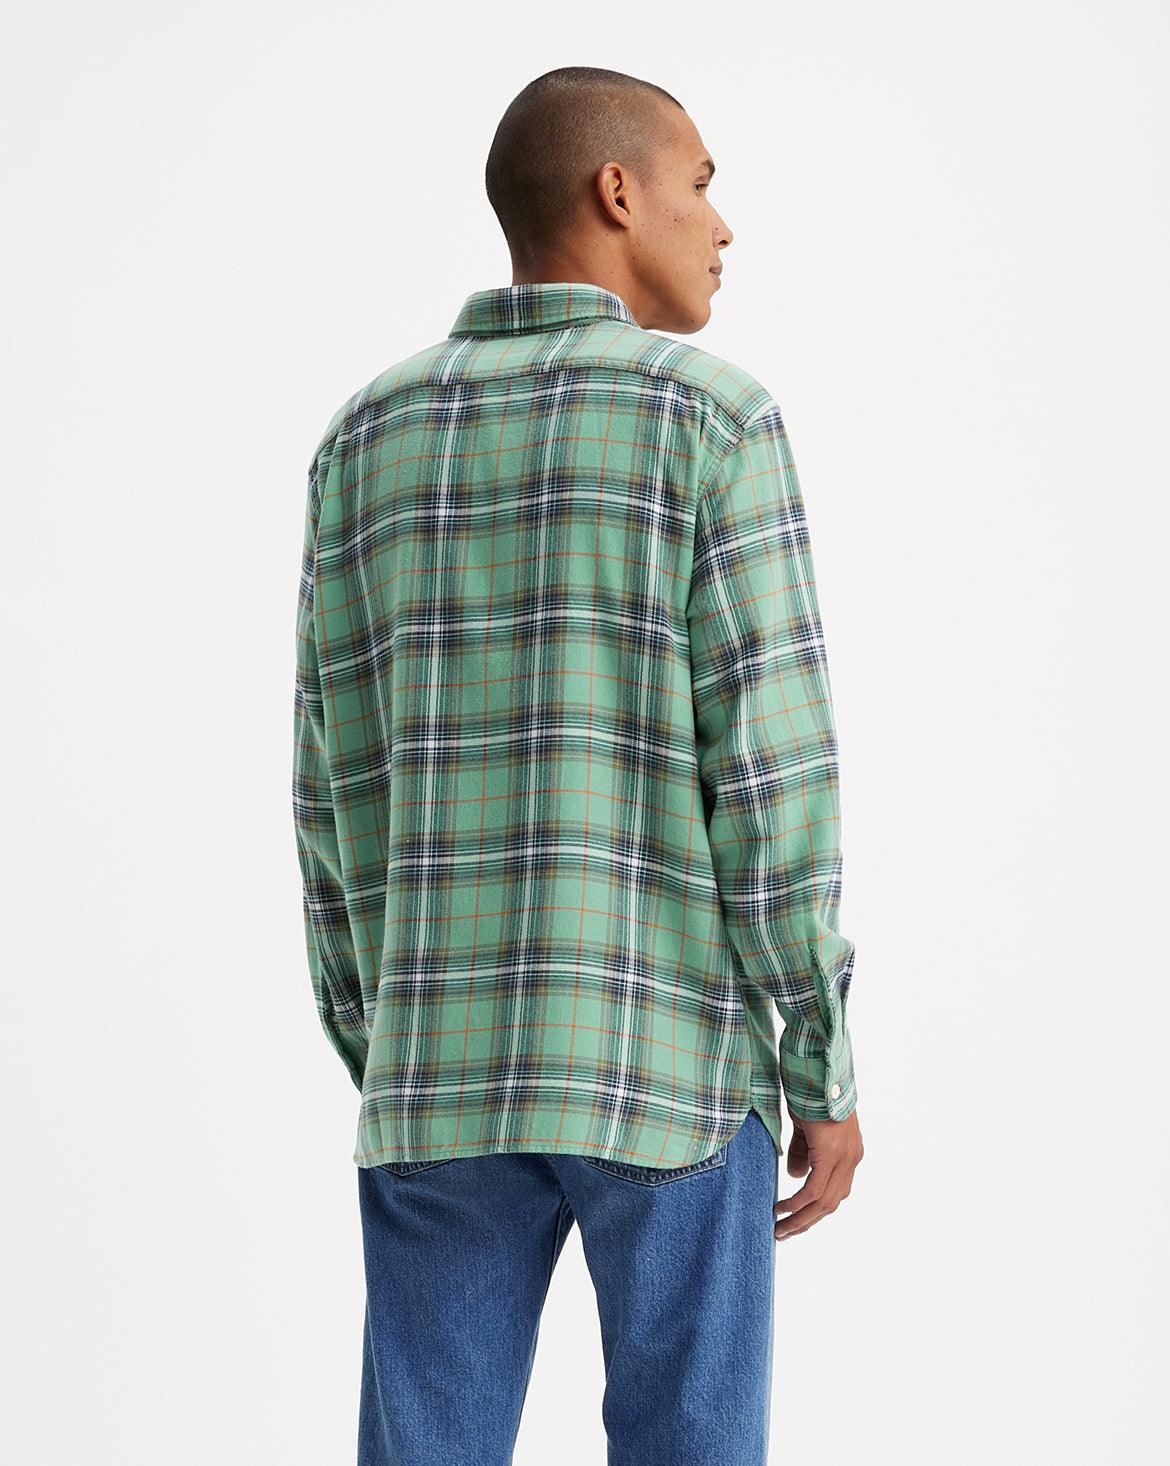 CLASSIC WORKER OVERSHIRT - MULTI-COLOR